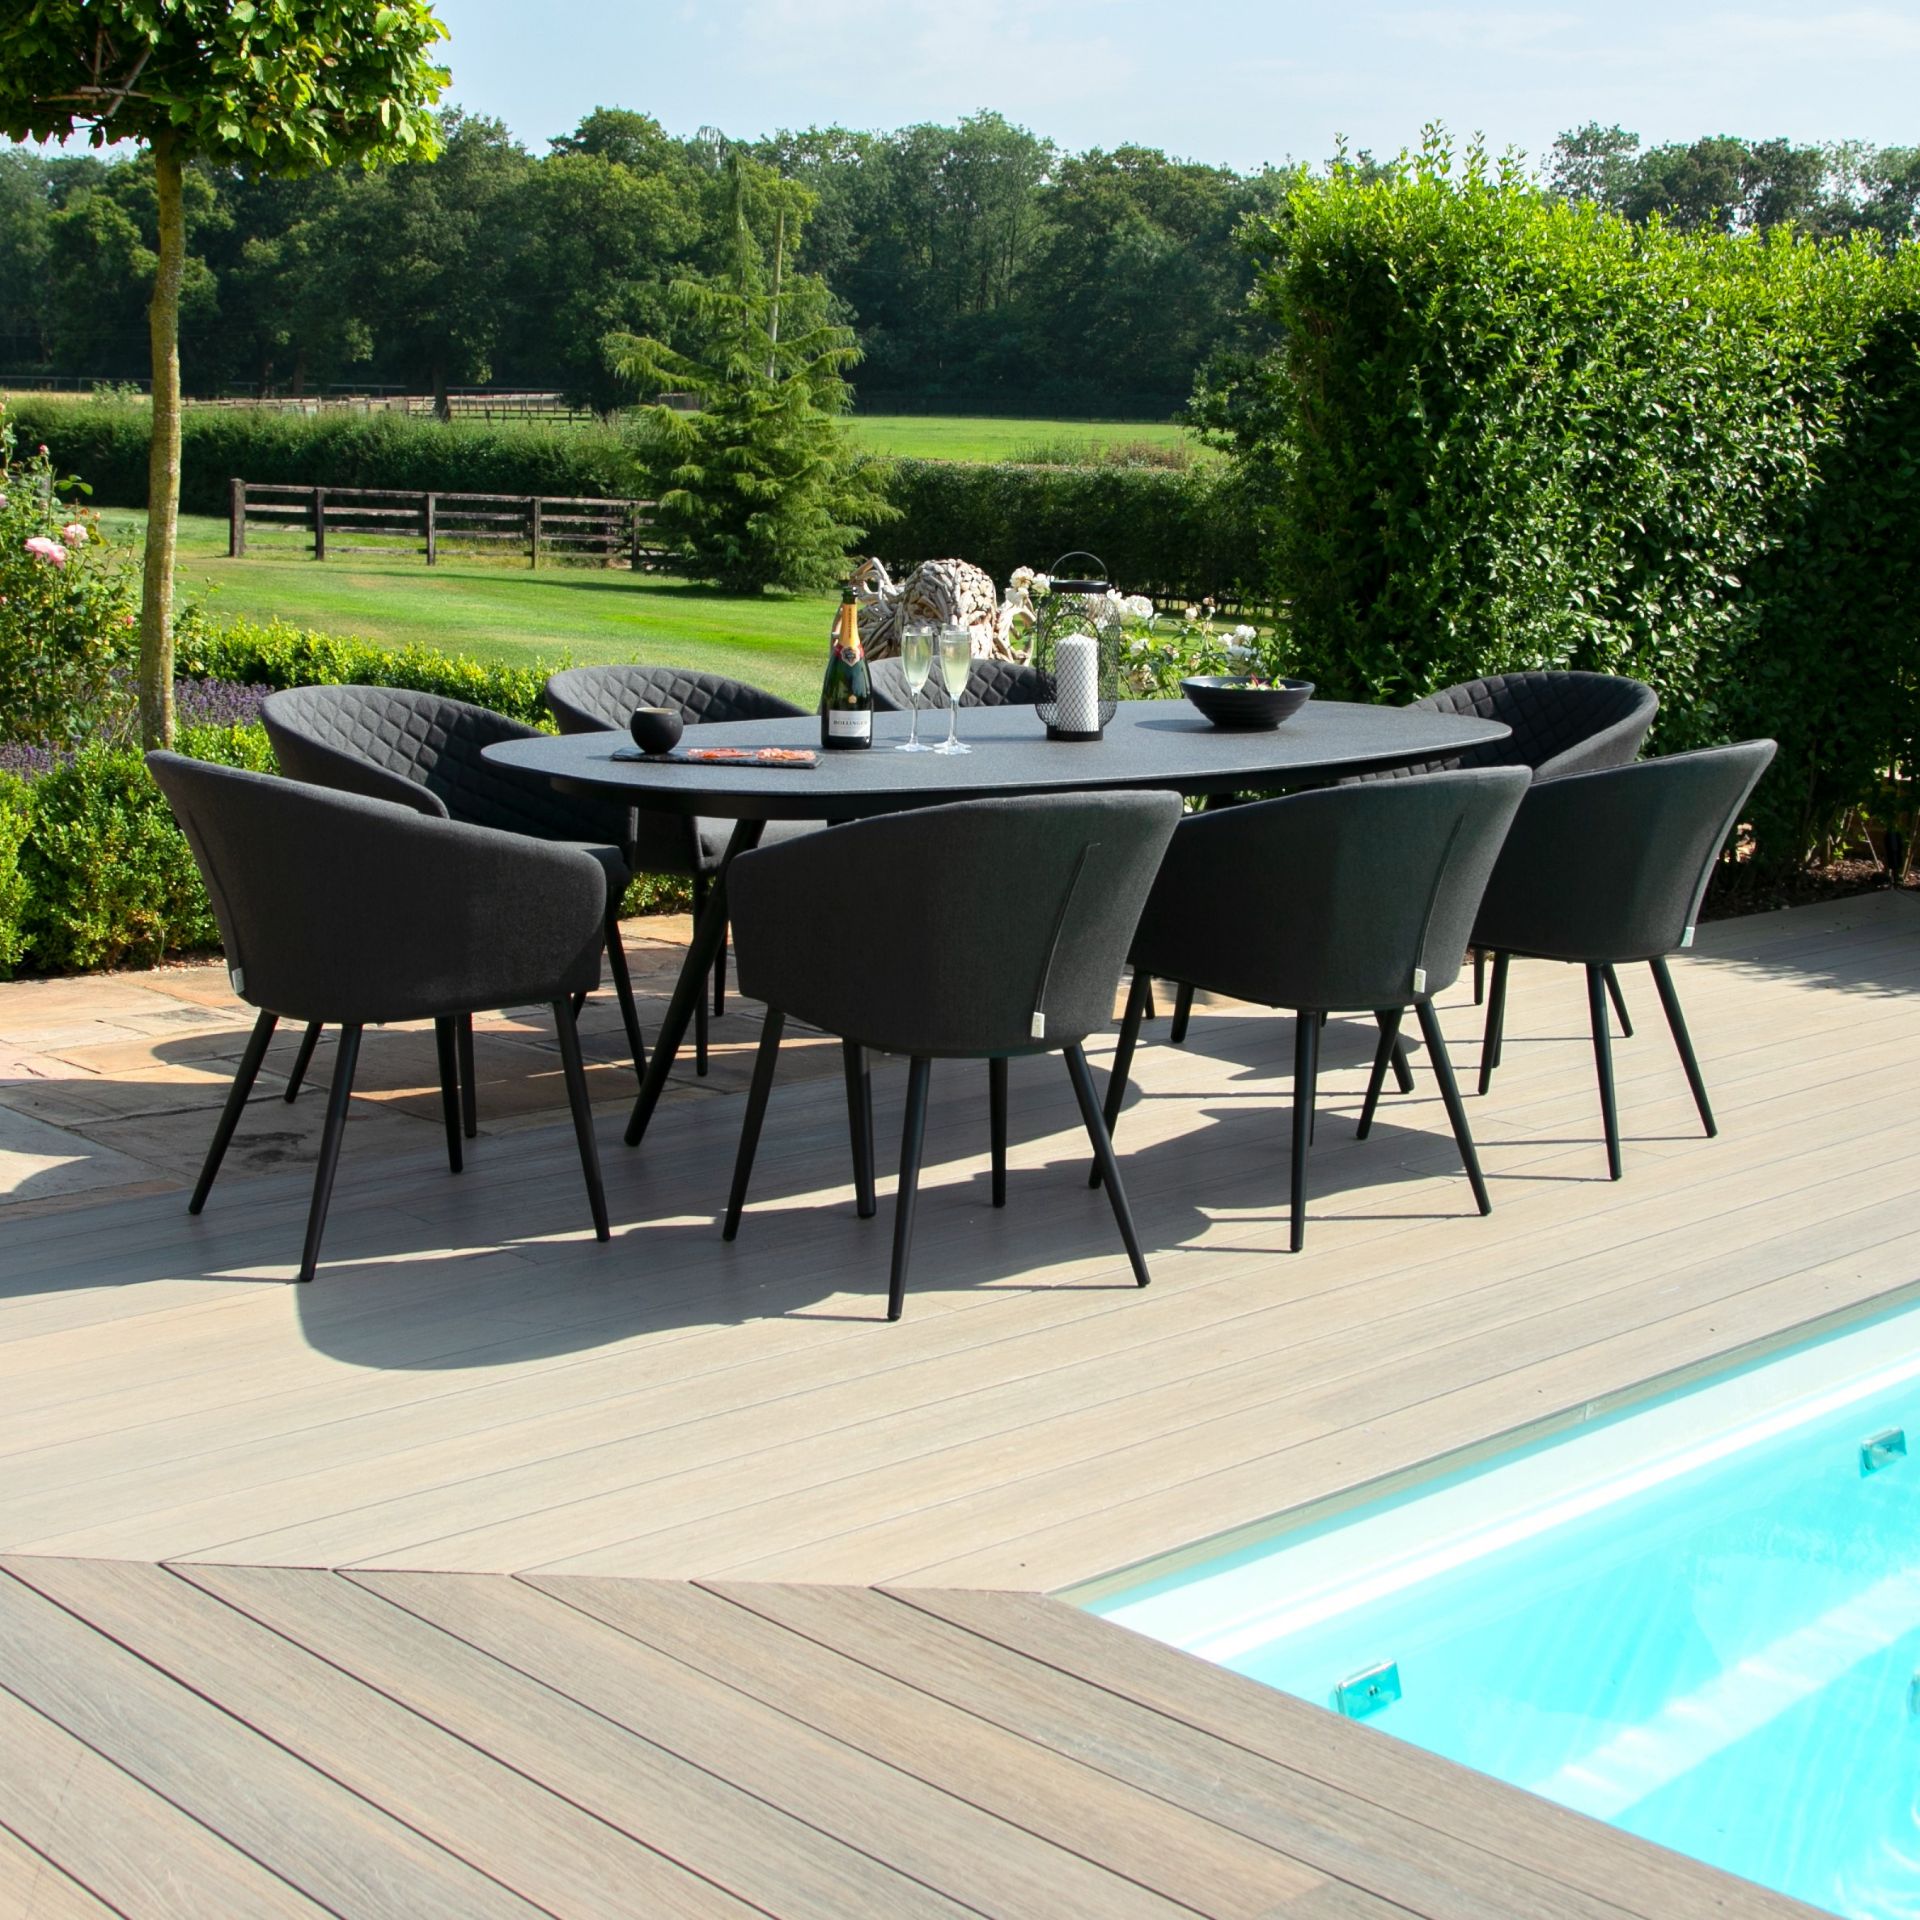 Maze Lounge - Ambition 8 Seat Oval Outdoor/Garden Dining Set (Charcoal) *BRAND NEW* RRP £2399 - Image 2 of 6